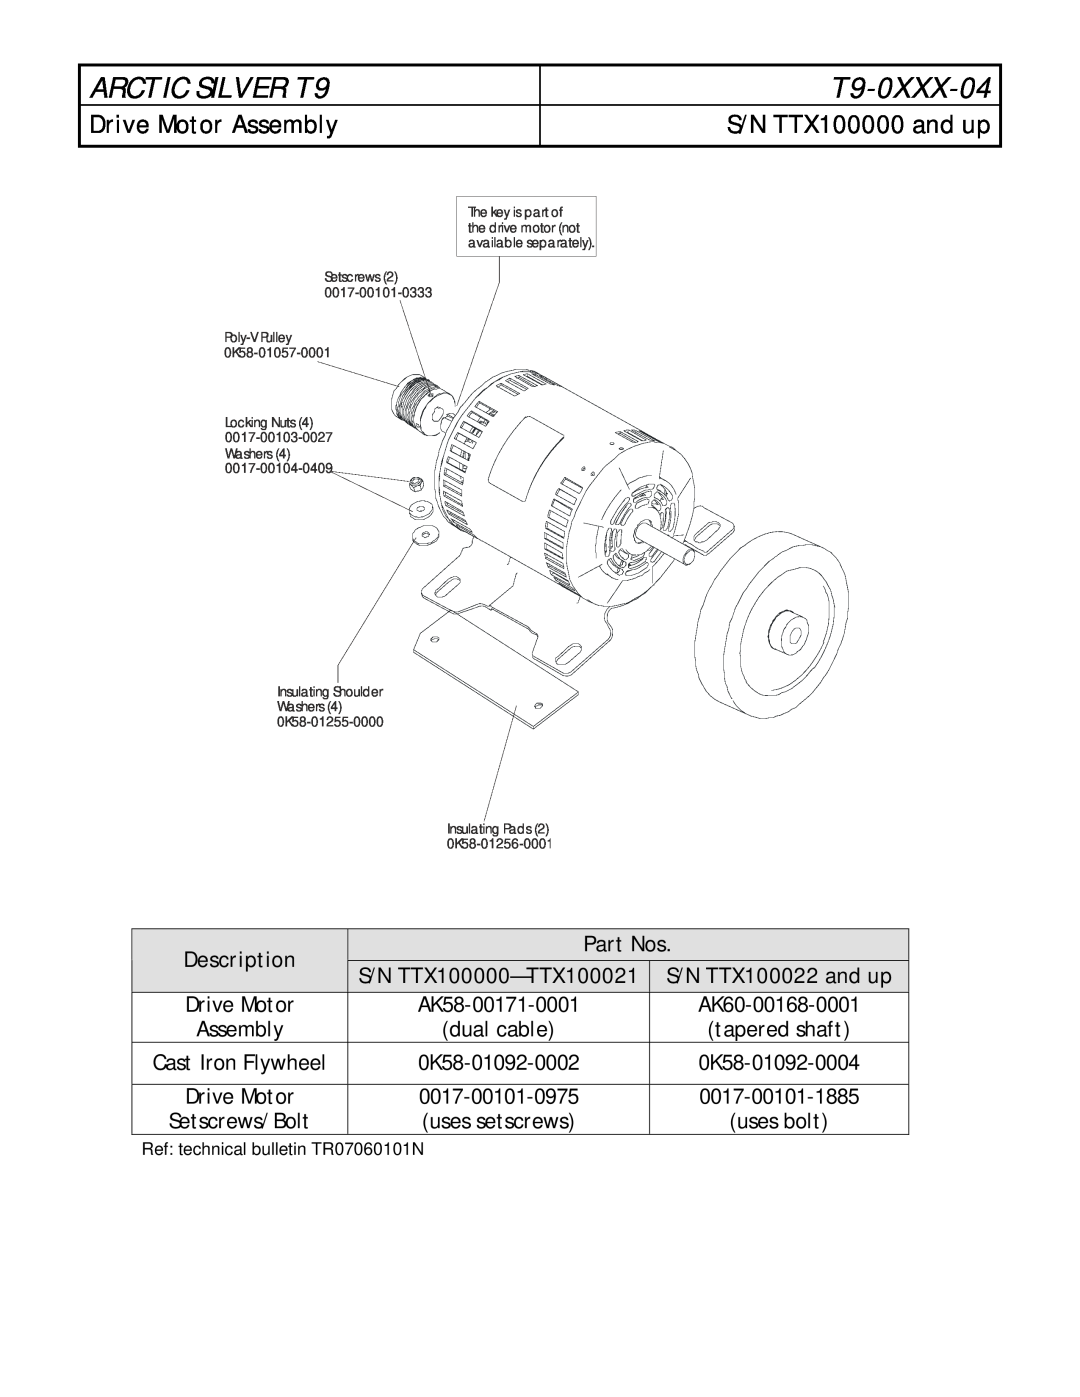 Life Fitness T9-0XXX-04 manual Drive Motor Assembly, Description, Part Nos, S/N TTX100000-TTX100021, S/N TTX100022 and up 